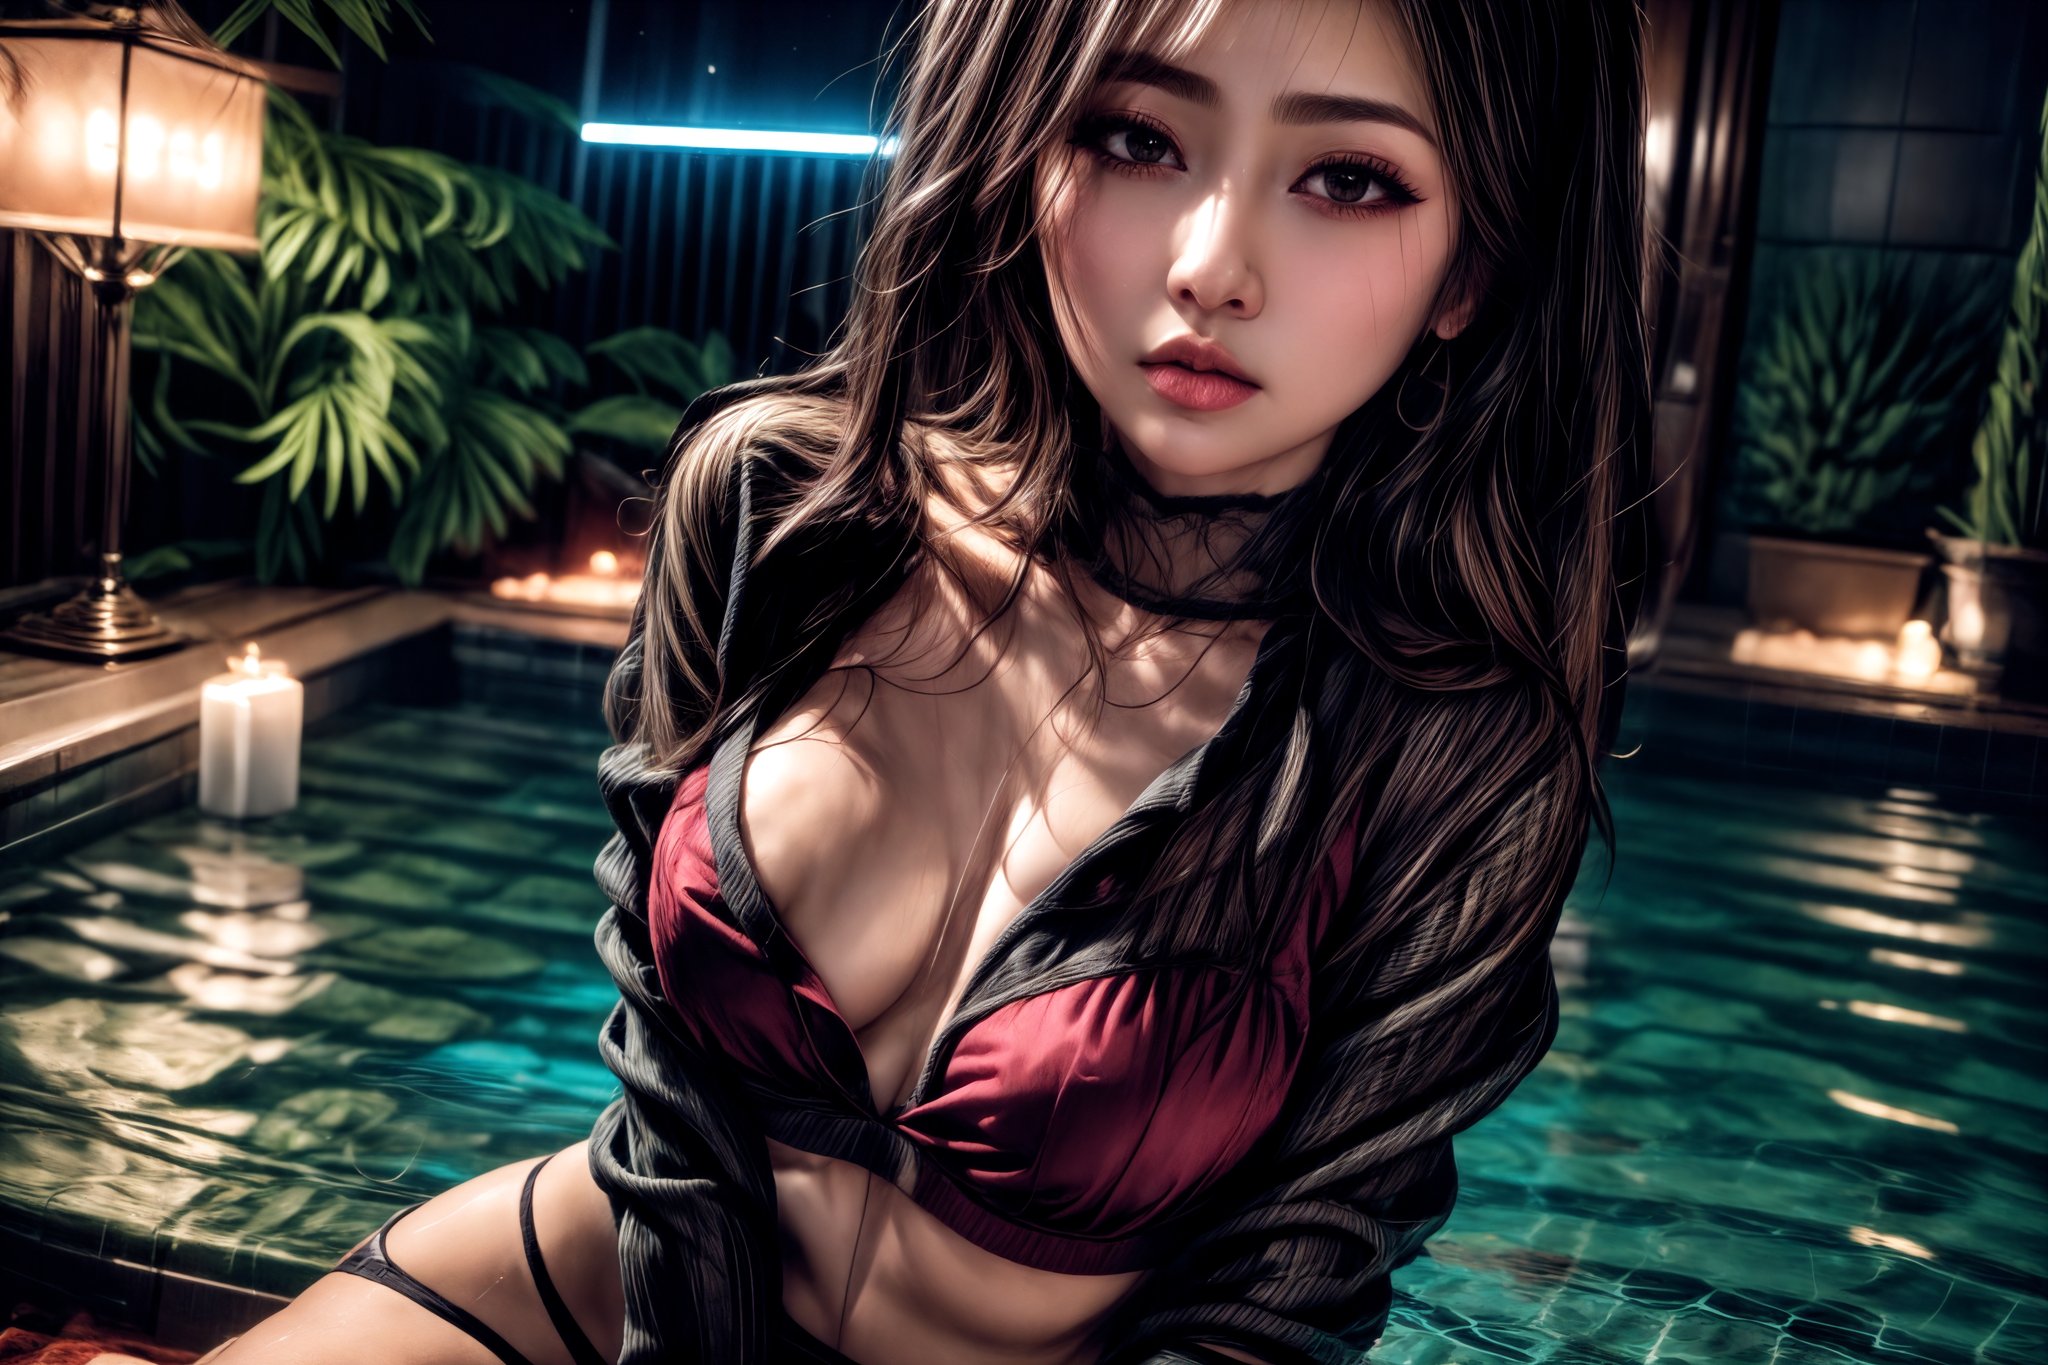 1 girl, night, night time, dark outside, moonlight, close up, bust shot, full frame, upper body, toned body, small waists, wearing sexy skimpy white tight shirt and tiny light blue shorts, wet clothes, see through clothes, hot springs pool , water falling into hot spring, floating lotus flowers, Lotus flowers floating, lotus flower with small candles inside floating on water, playing in the water, flirting with viewer, water splashing all around girl, wet clothes, wet hair, wet body, water falling down body, water falling down breasts, playing with herself, full frame, close up, looking up at viewer, pulling on shirt,  [(1 Philippine 20 yo girl), beautiful, gorgeous, sexy, model, very long black hair, long layered hair down to butt, sensual, horny, flirty, bit on bottom lip, bitting on bottom lip, hand on breast, holding her breast, neon pink lingerie under clothes, silver jewelry, beautiful face, toned body, medium breasts, bust, hi-res blue eyes, long eye lashes, black eye liner, blush, dark pink lips, detailed face,] ,povbathinfront, perfect face, perfect makeup, ,HeadpatPOV, guided breast grab, breast grab, hands on own chest, no man,upshirt,crop shirt underboob, medium breasts, 8k, panties and hips at bottom center of photo,from below, close up, very close to girl, hugging girl, ,lora:imkiss-000015:1,  black eye liner, long eye lashes, blush, red lipstic, long layered hair down to waist, long layered bangs, light tan, close, pov, bust shot,ridingsexscene,guided breast grab